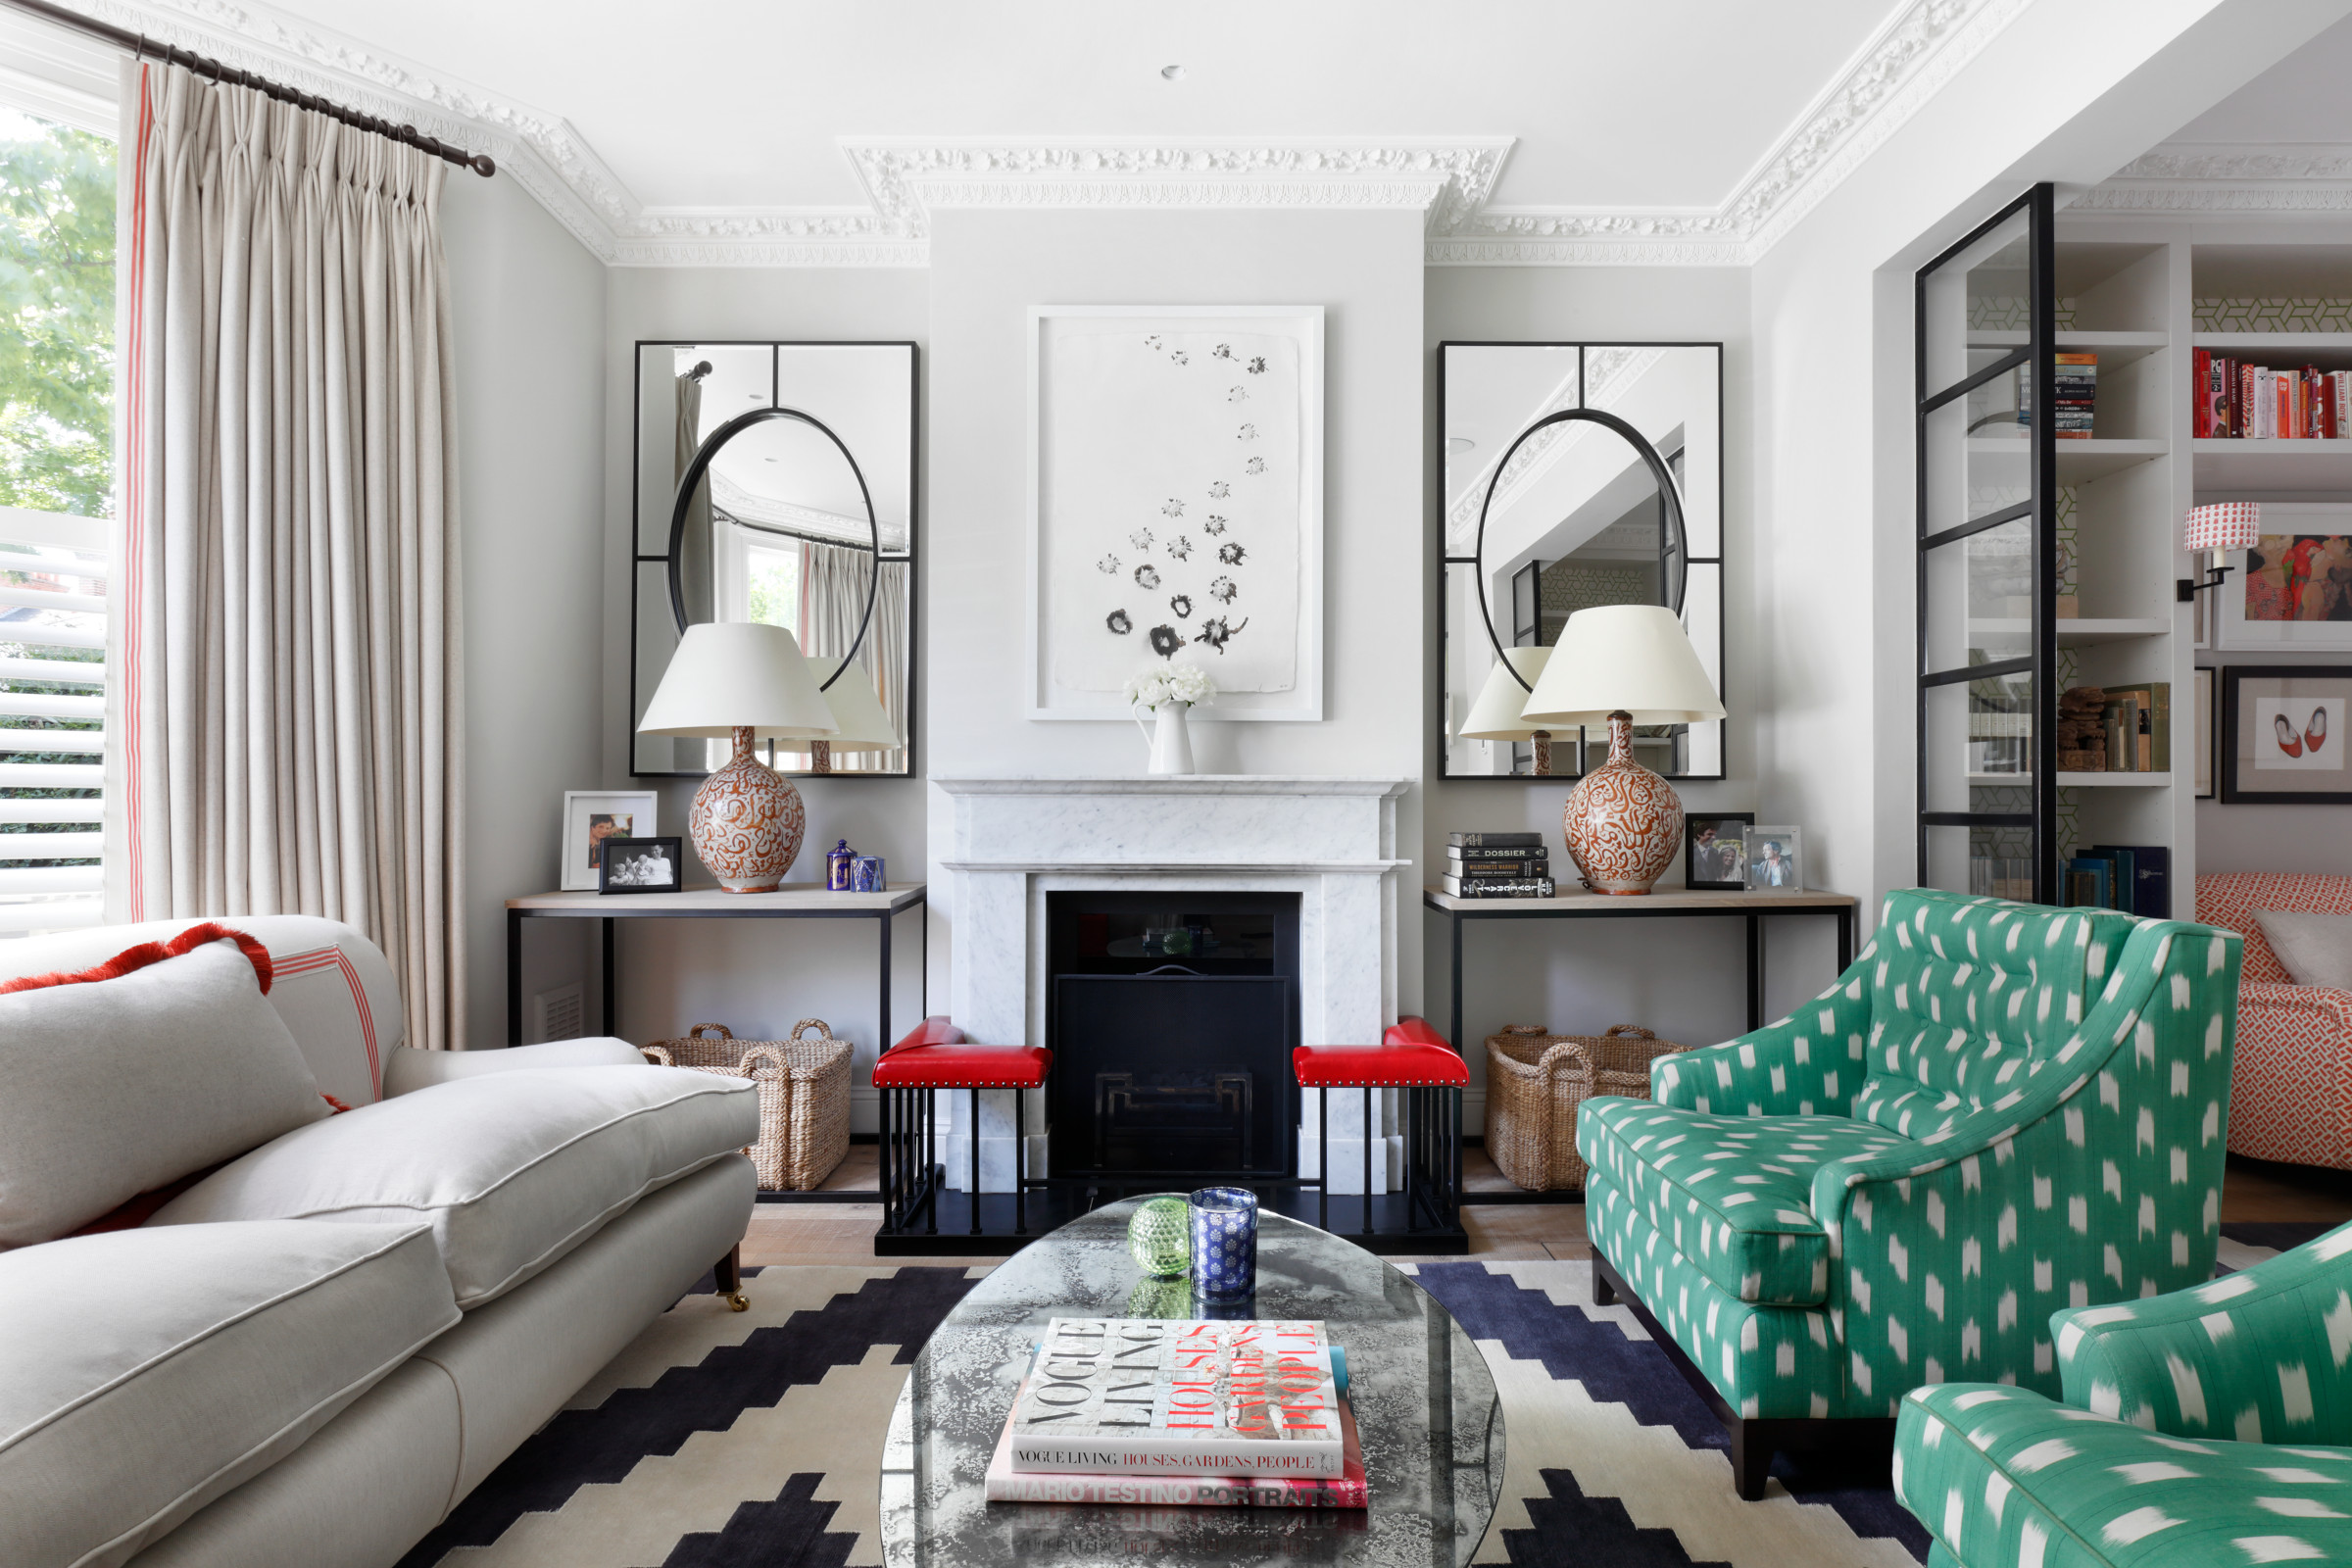 Living room alcove ideas: 10 stylish looks for nooks or niches |